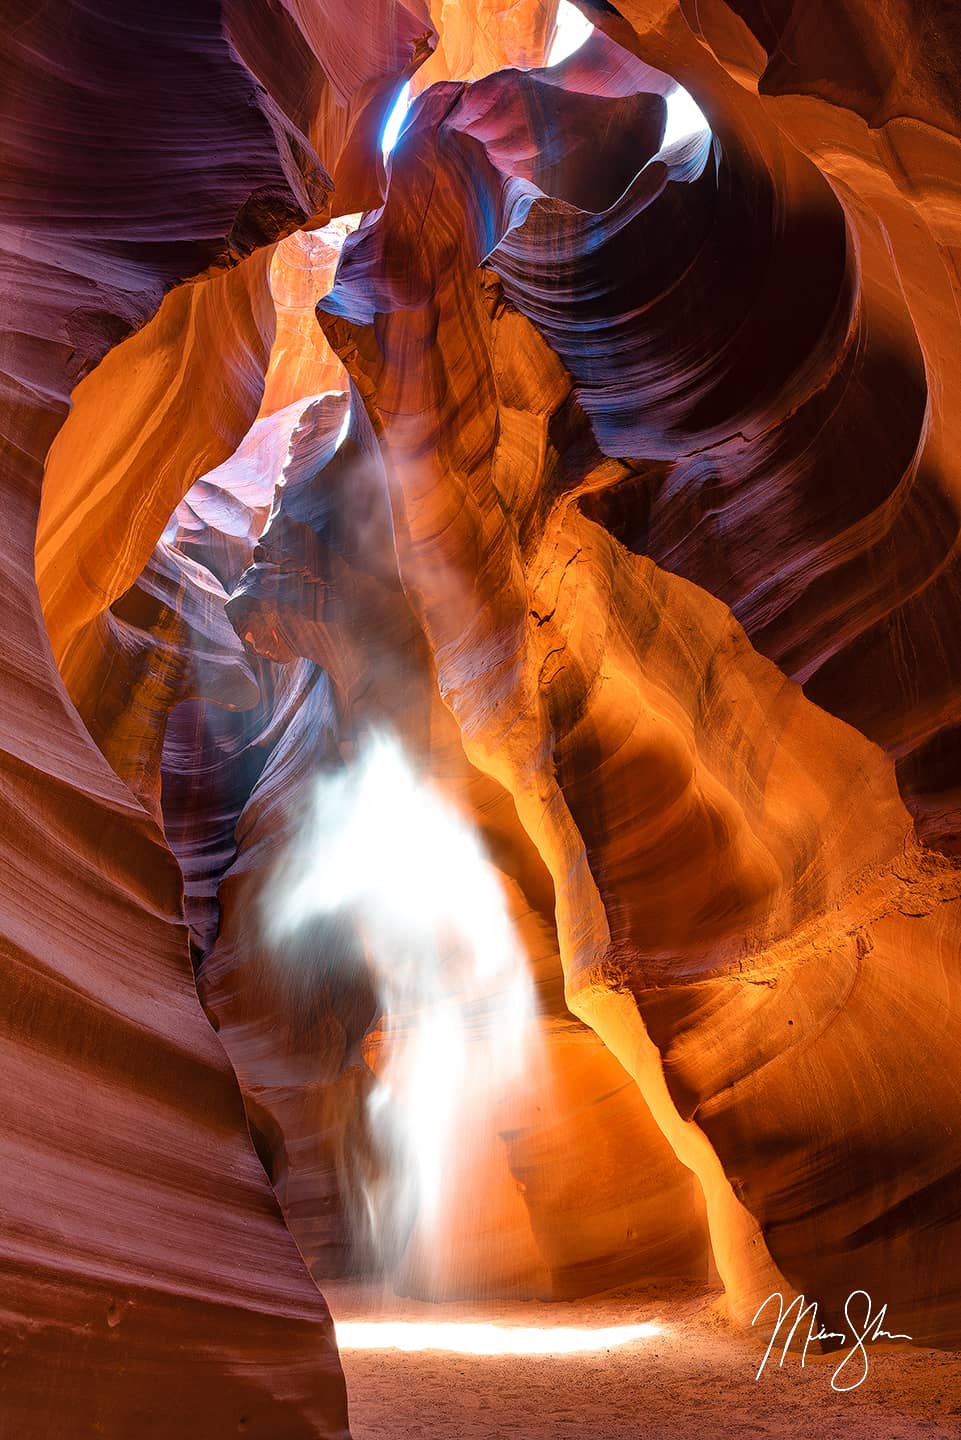 The shapes that light beams in Antelope Canyon create take on interesting forms